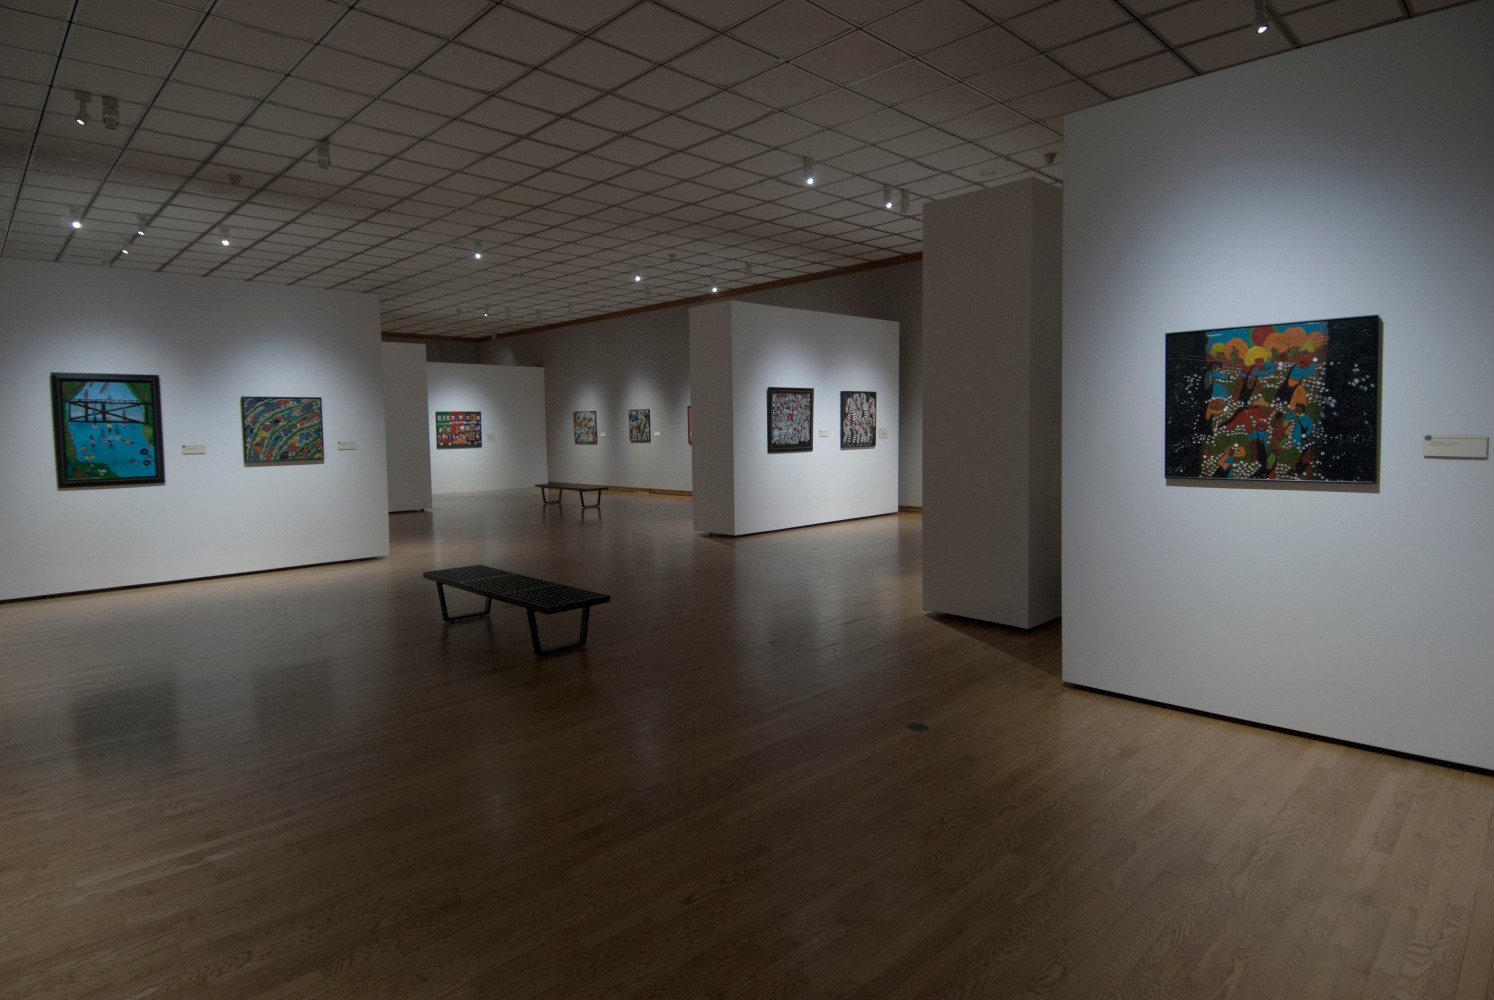 Southern Roots: The Paintings of Winfred Rembert, Muskegon Museum of&amp;nbsp;Art, Muskegon, MI, December 12, 2017- March 18, 2018. Photo: Art Martin.